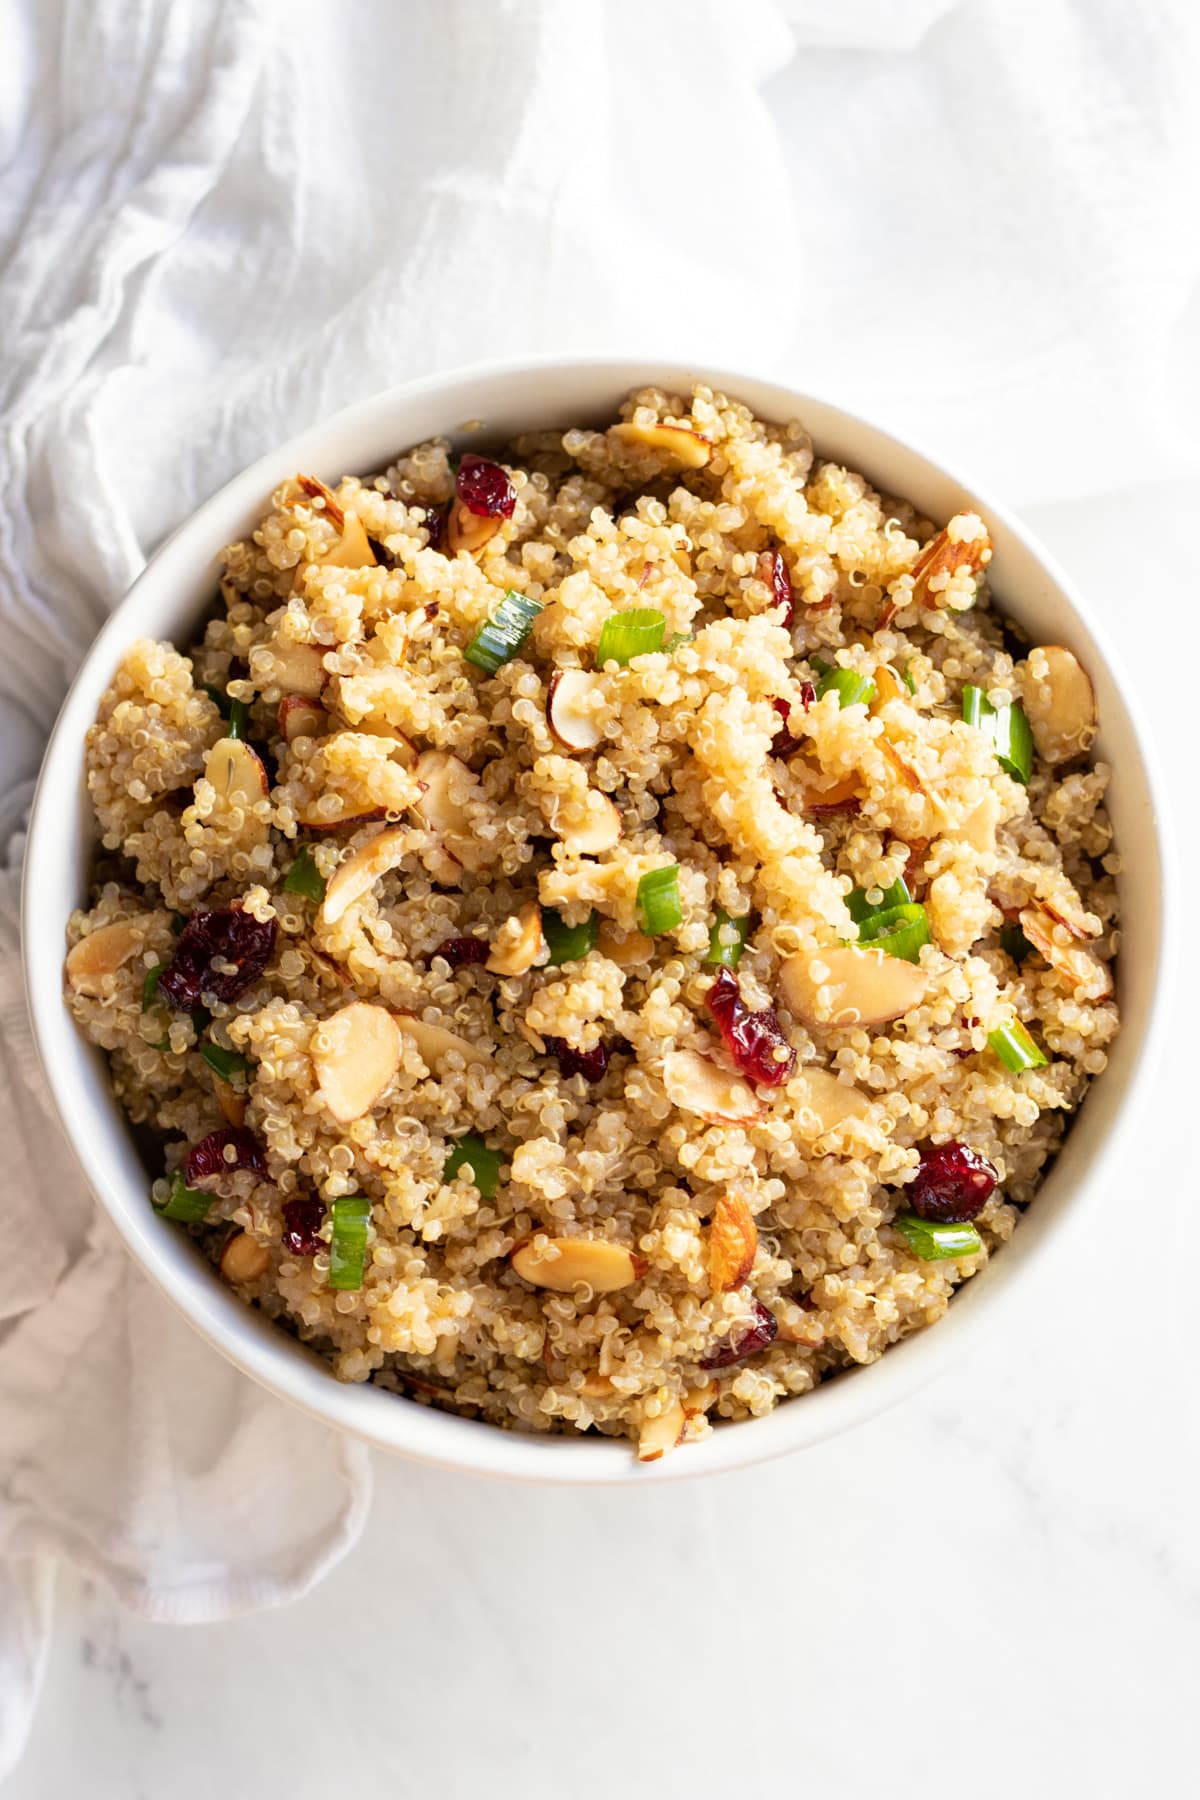 A bowl of quinoa salad dotted with dried cranberries, toasted sliced almonds, and green onion tops.